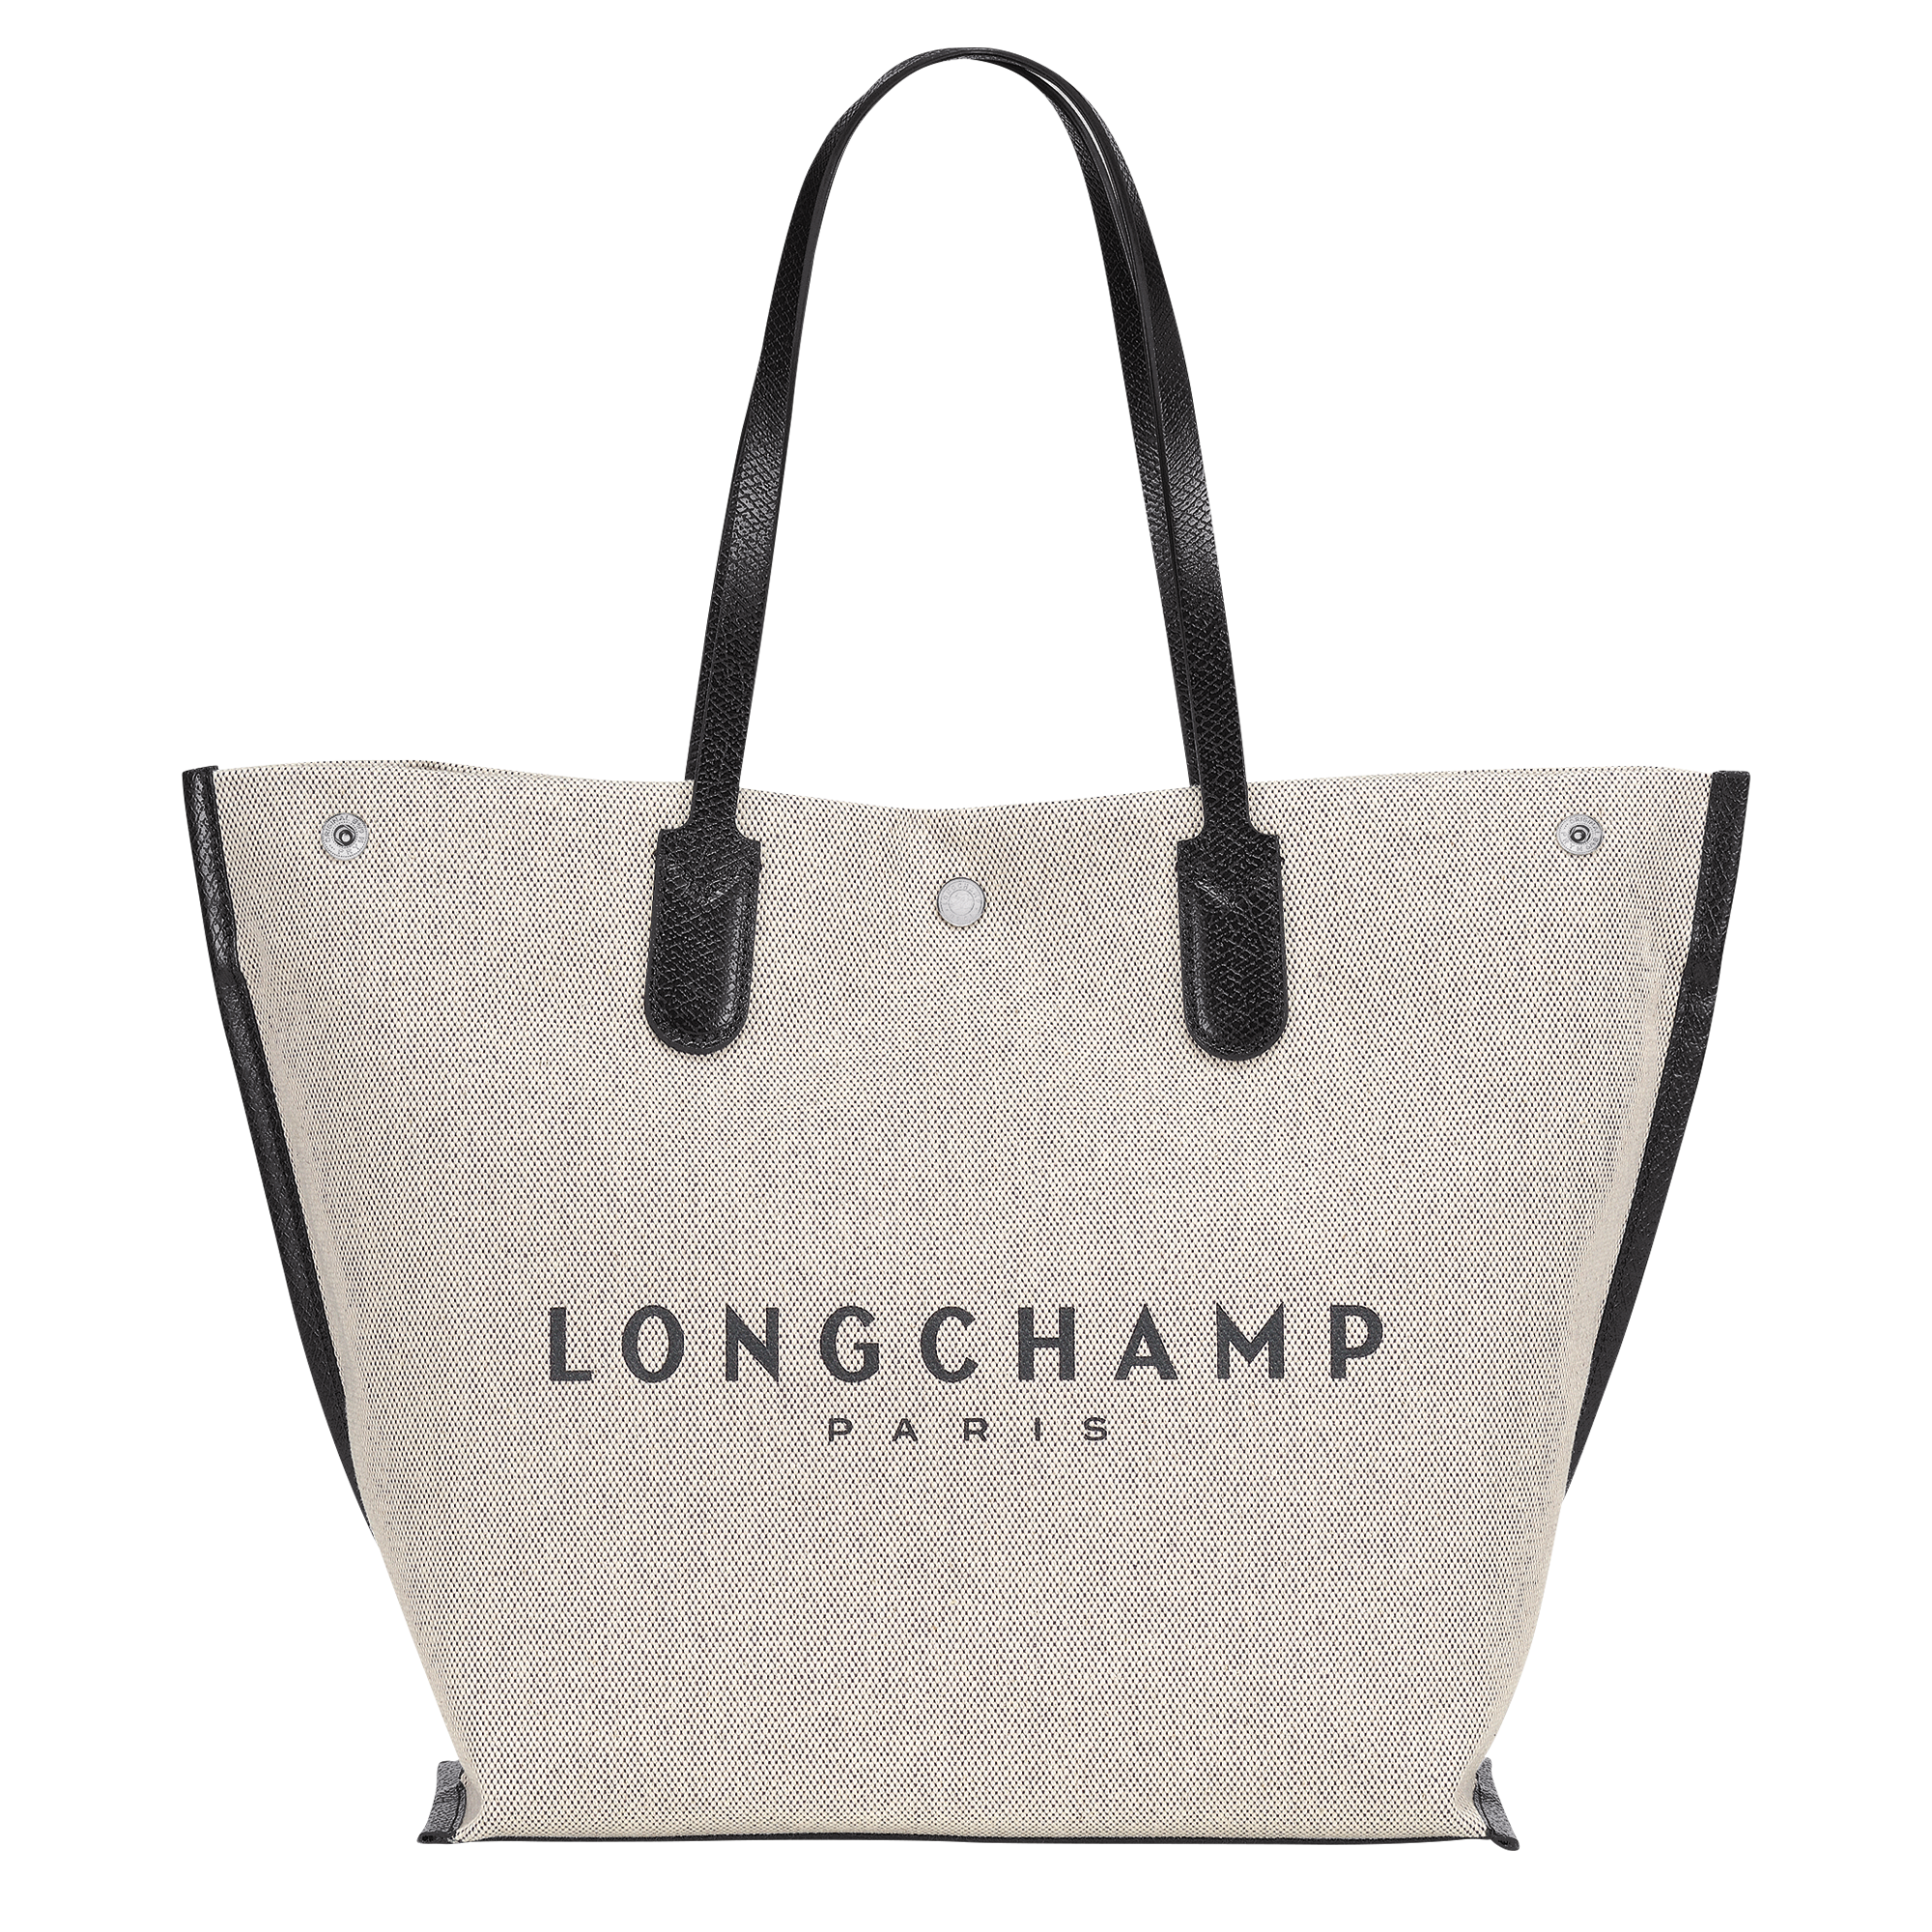 Longchamp Roseau Leather Tote Bag in Beige - The Lux Portal